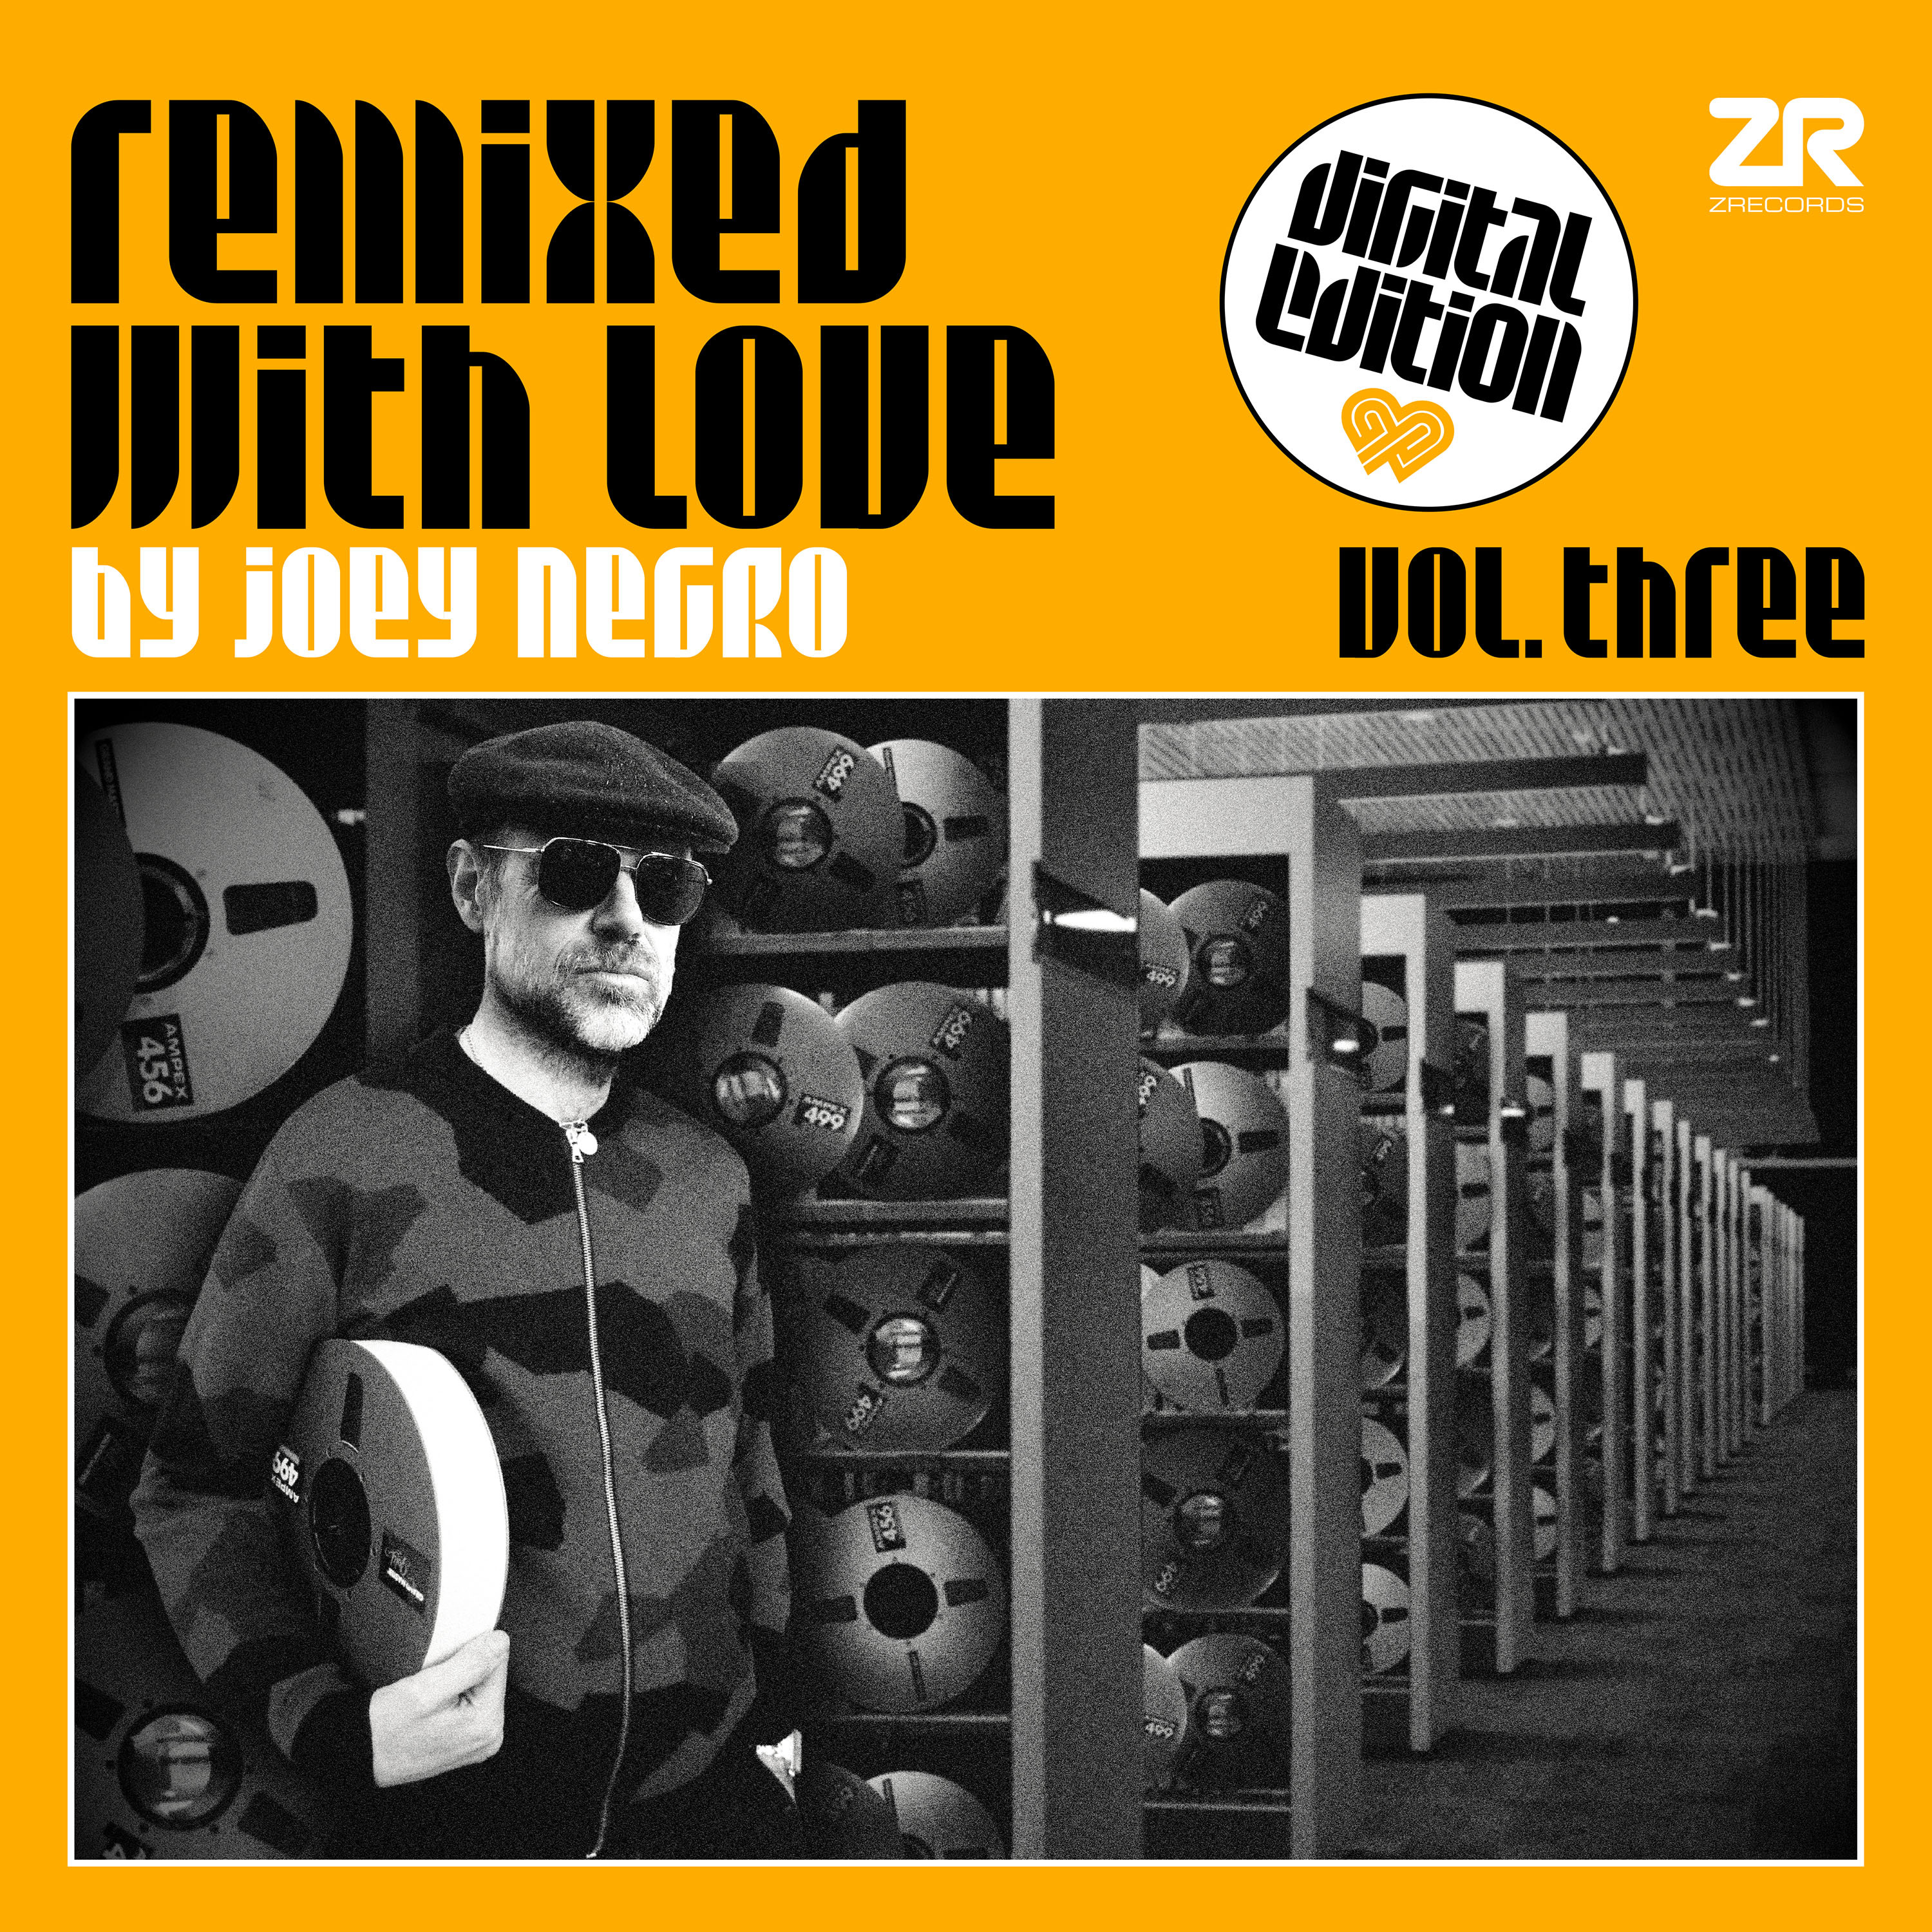 Must Be the Music (Joey Negro 2am Disco Reprise)